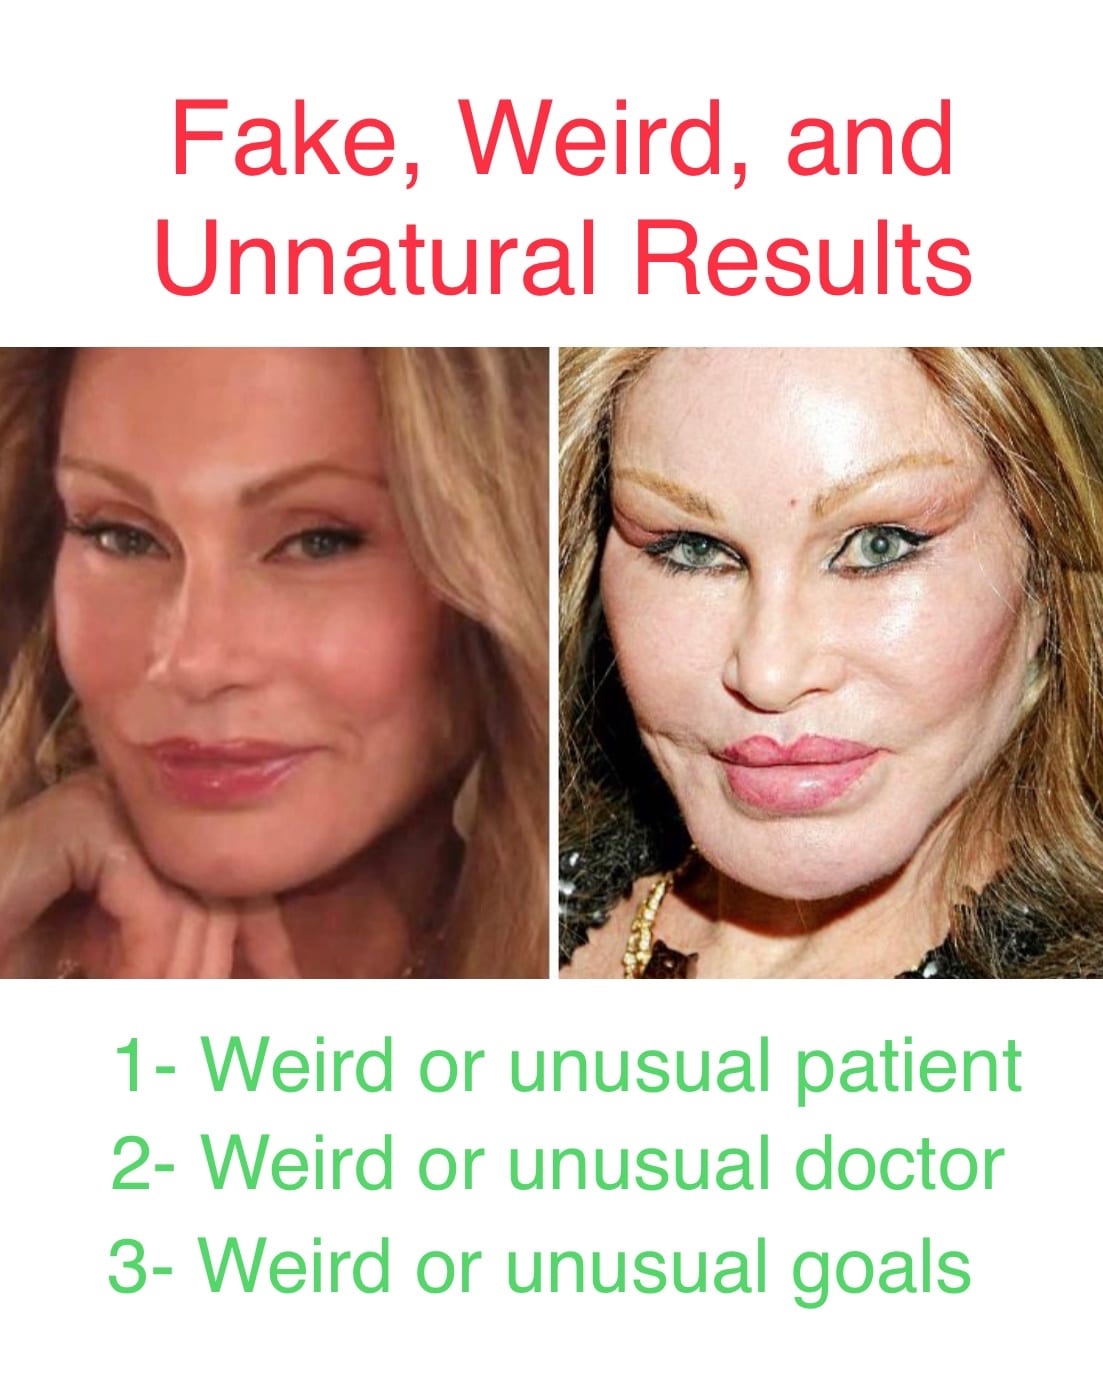 Fake, Weird, Bad, and Unnatural Results in Cosmetic and Plastic Surgery :  How and Why Do They Happen? - Dr. Chris Saunders MD